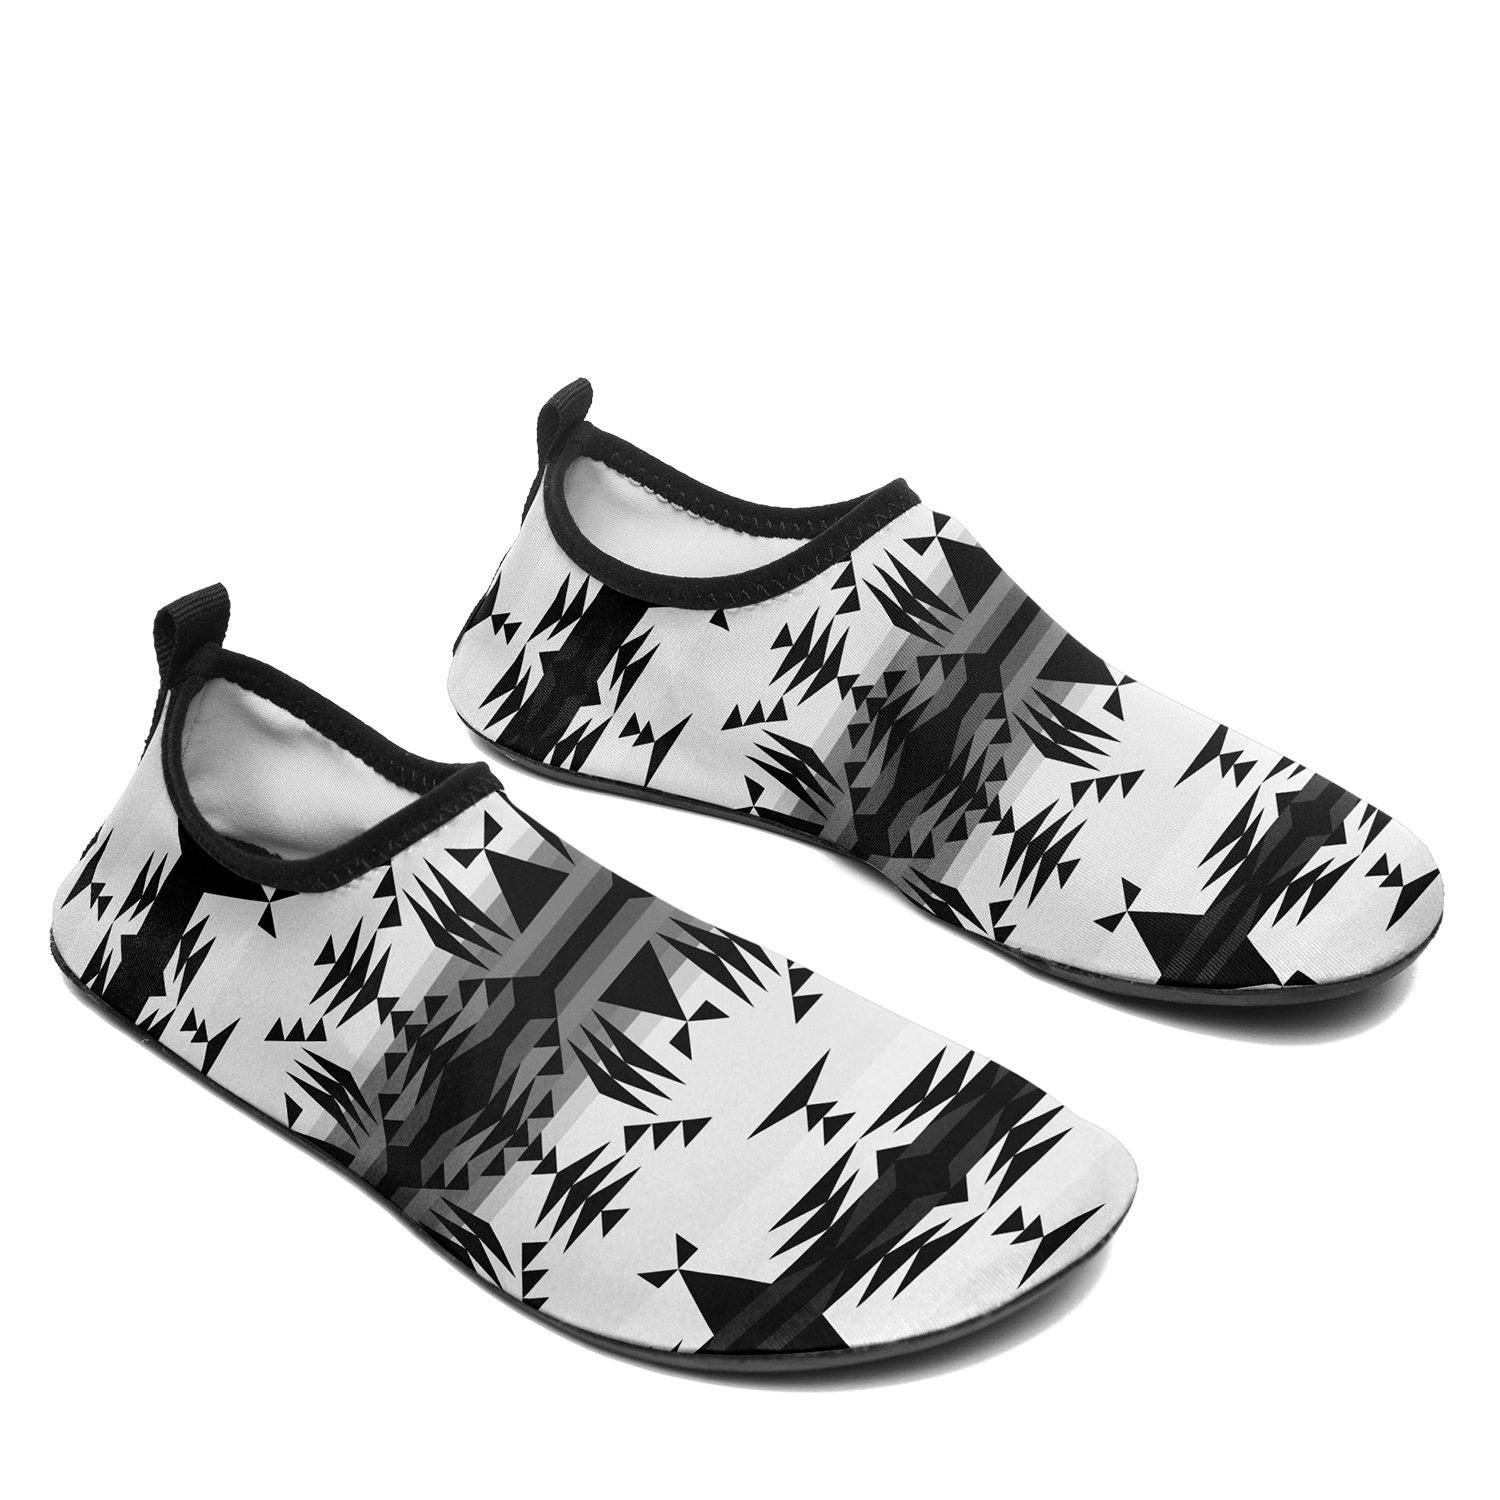 Between the Mountains White and Black Sockamoccs Slip On Shoes 49 Dzine 